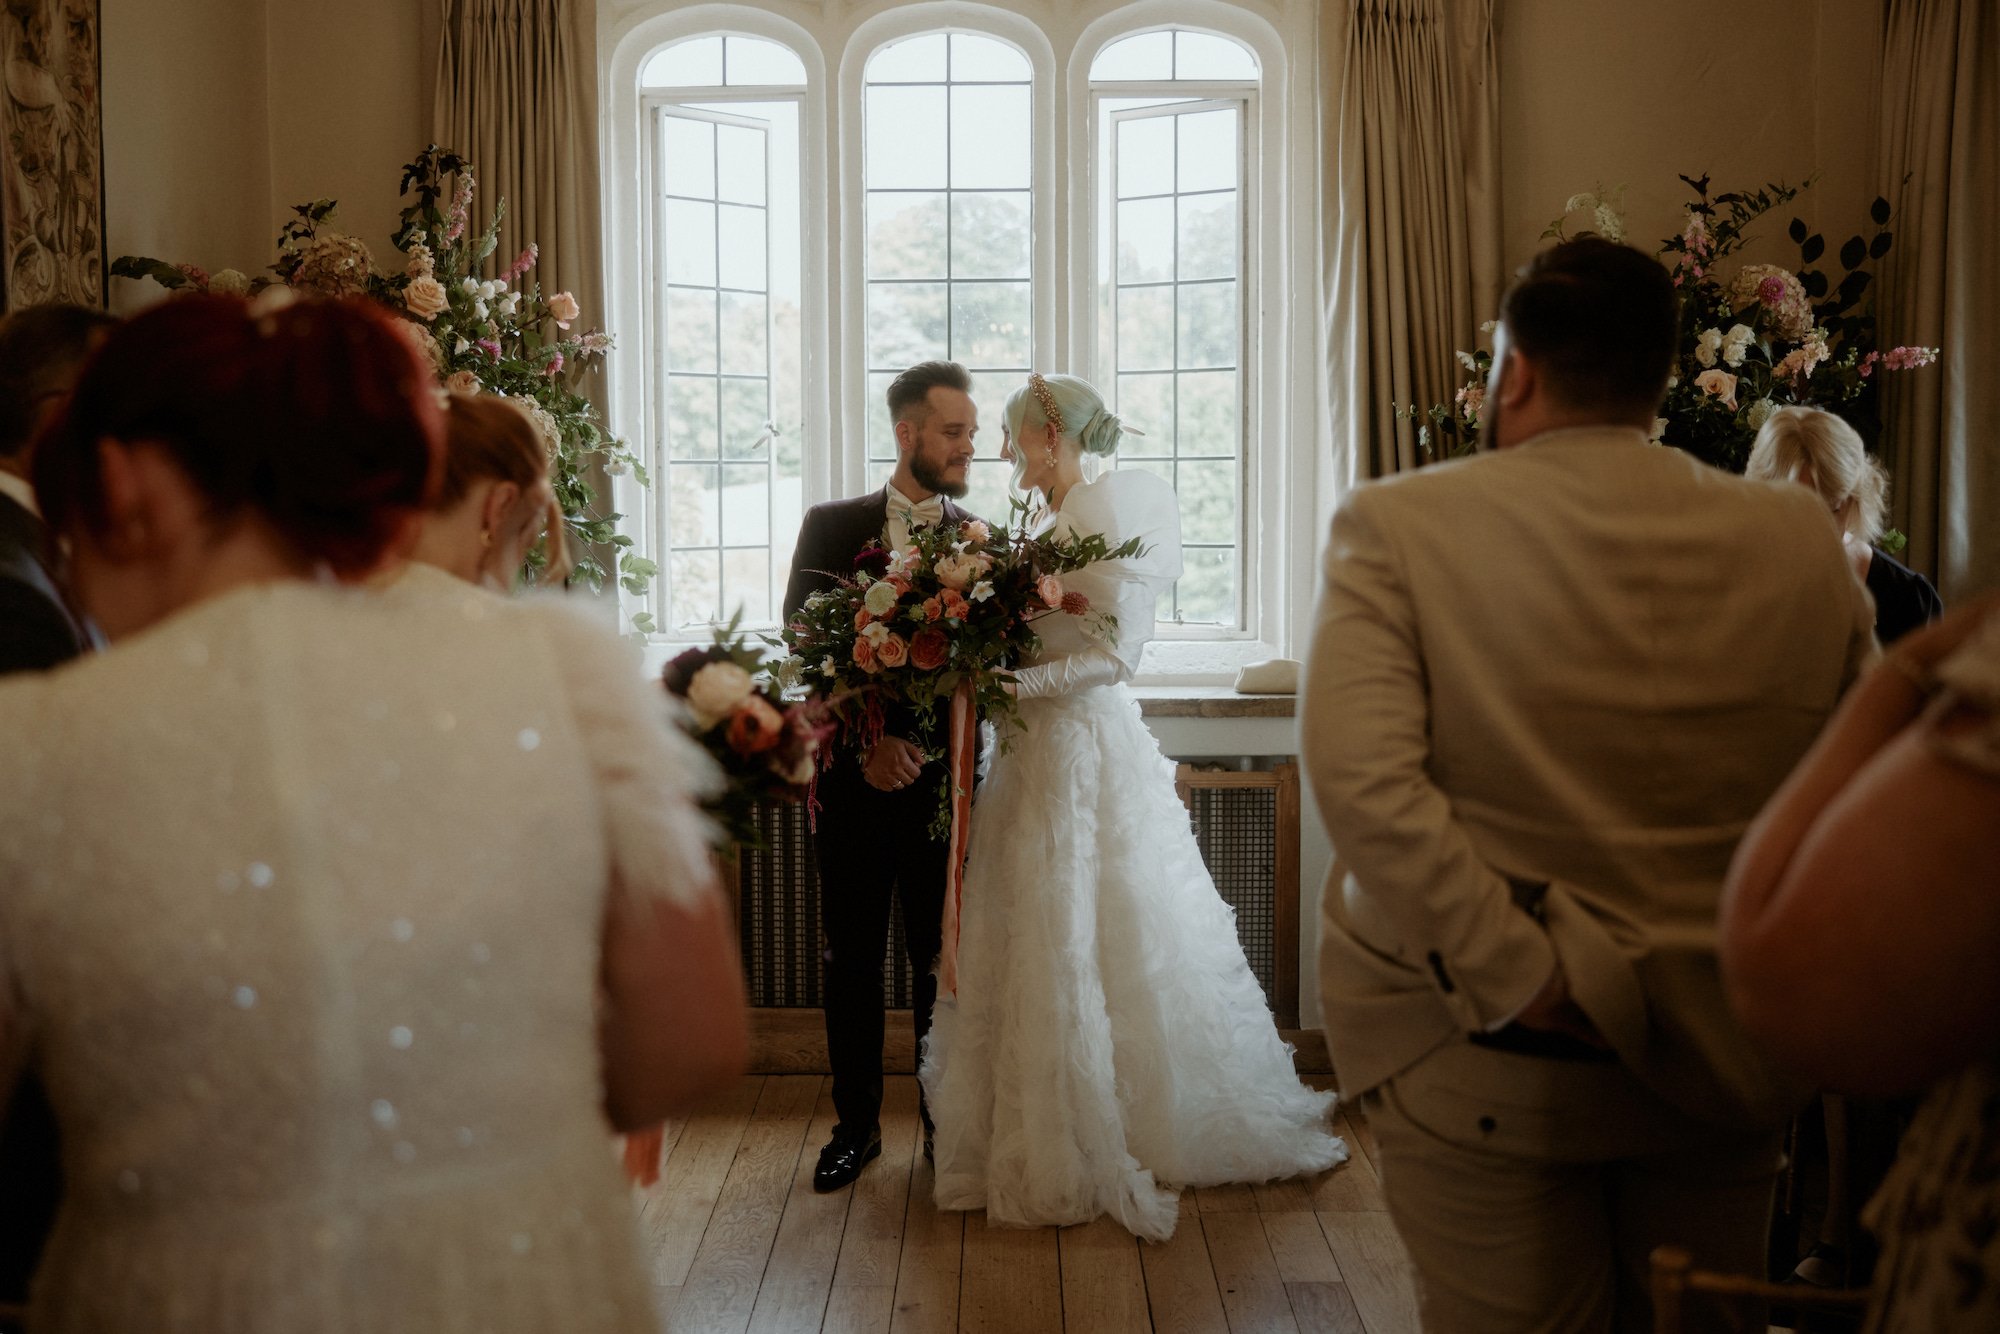 Beautiful bride Claire wore the Ruffle Rose Skirt, Mars Sleeves and a bespoke corset by Halfpenny London for her wedding day